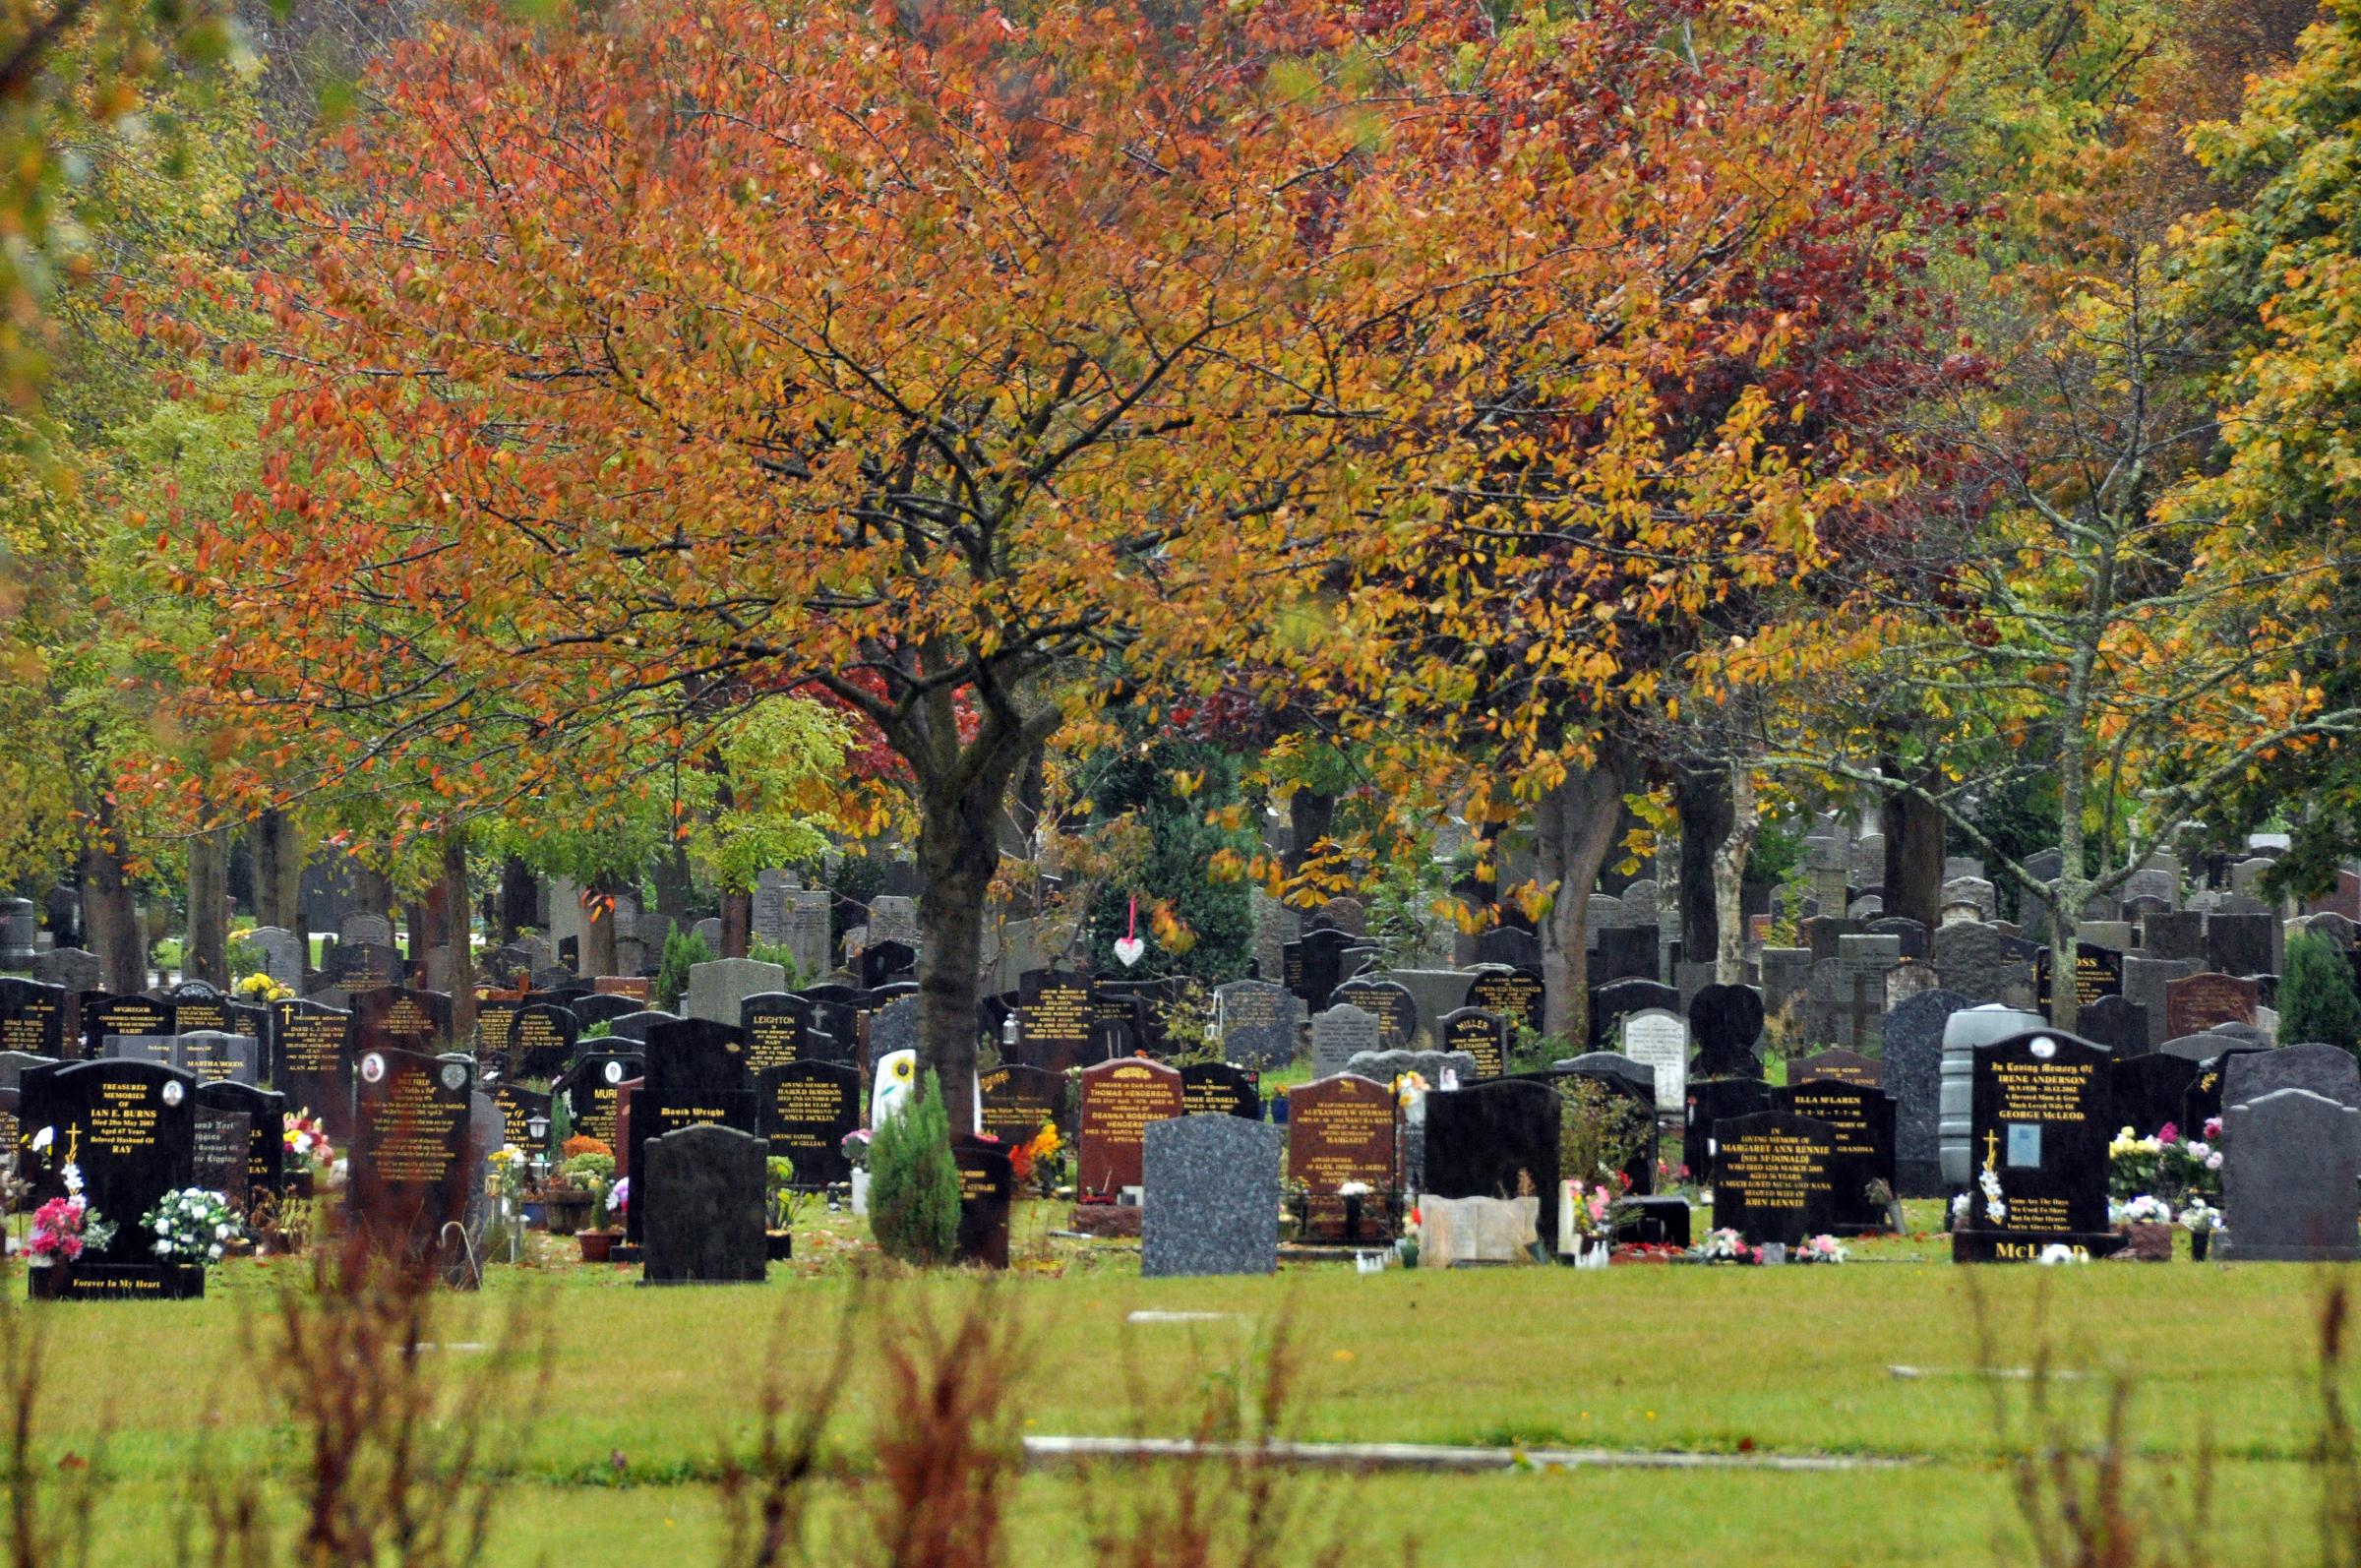 Demand for action at cemetery